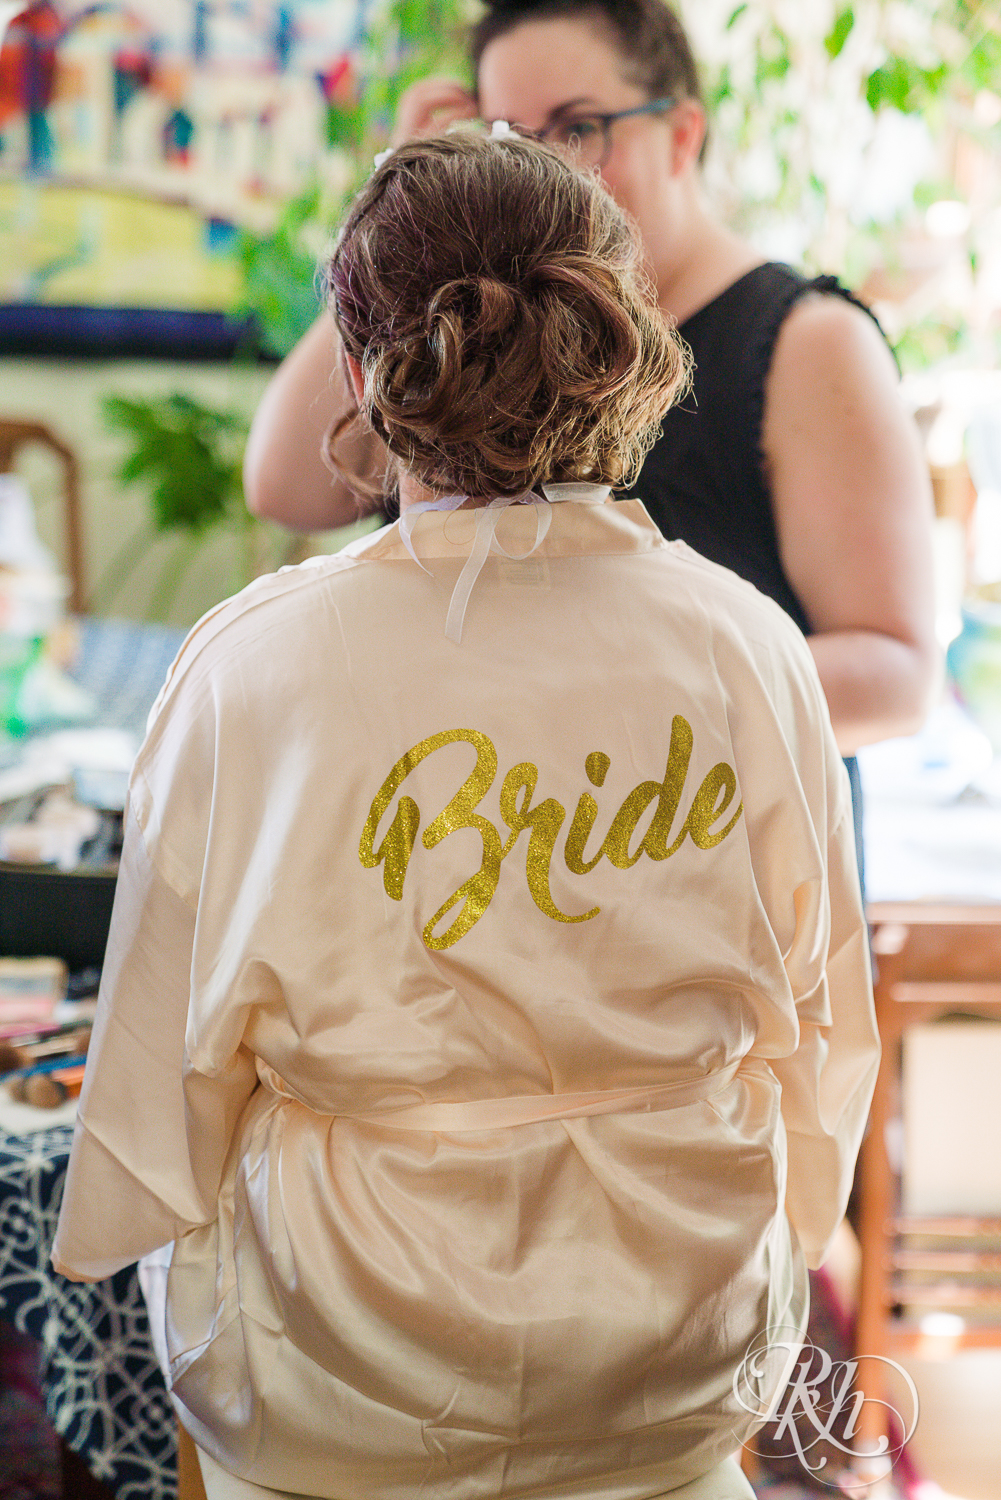 Bride getting makeup done while wearing a robe that has Bride written on the back.